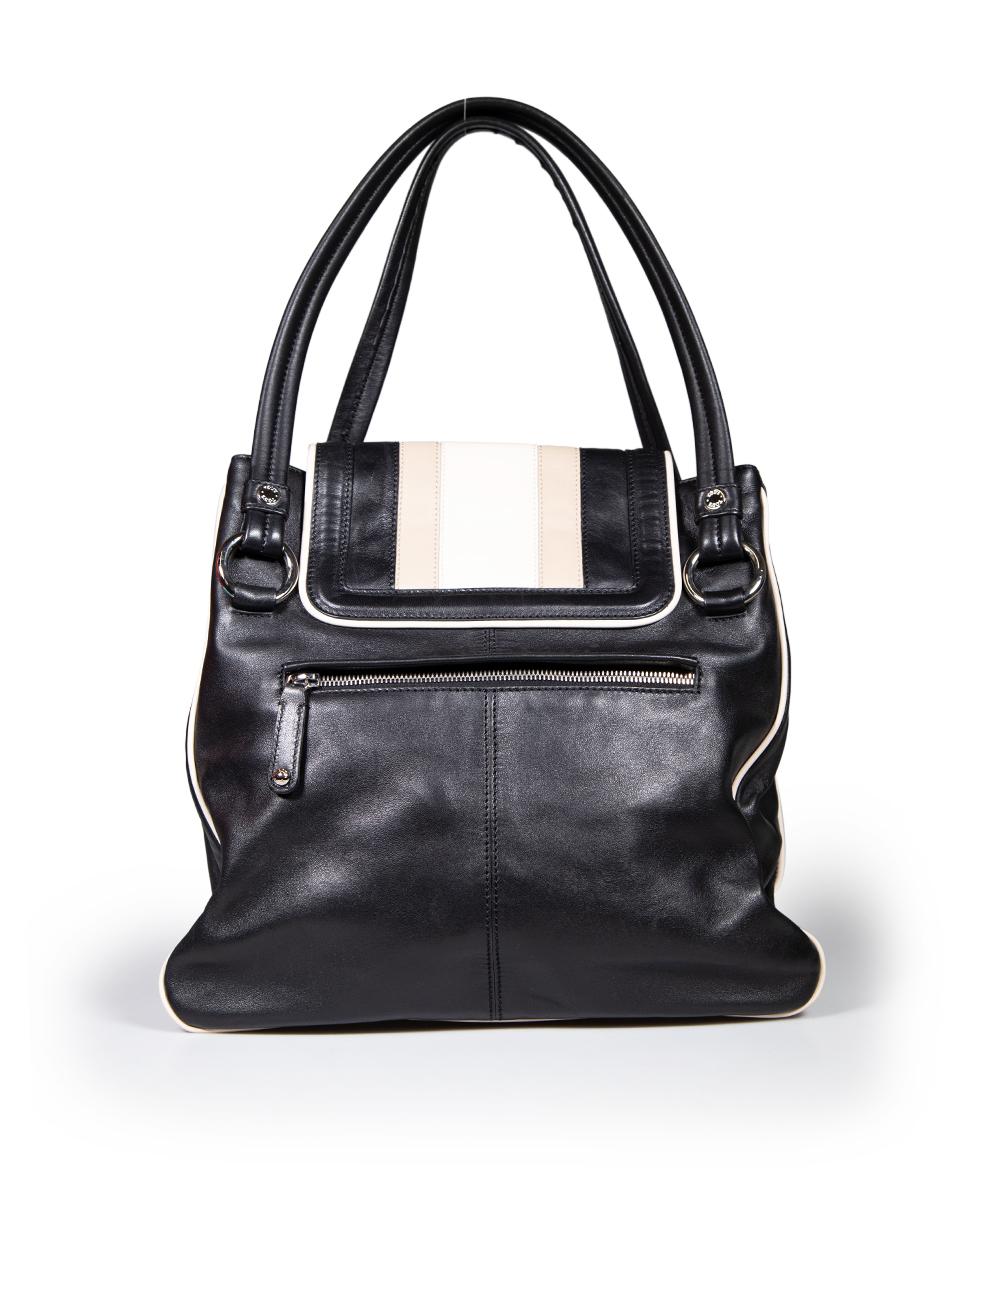 Tod's Black Leather Panelled Shoulder Bag In Good Condition For Sale In London, GB